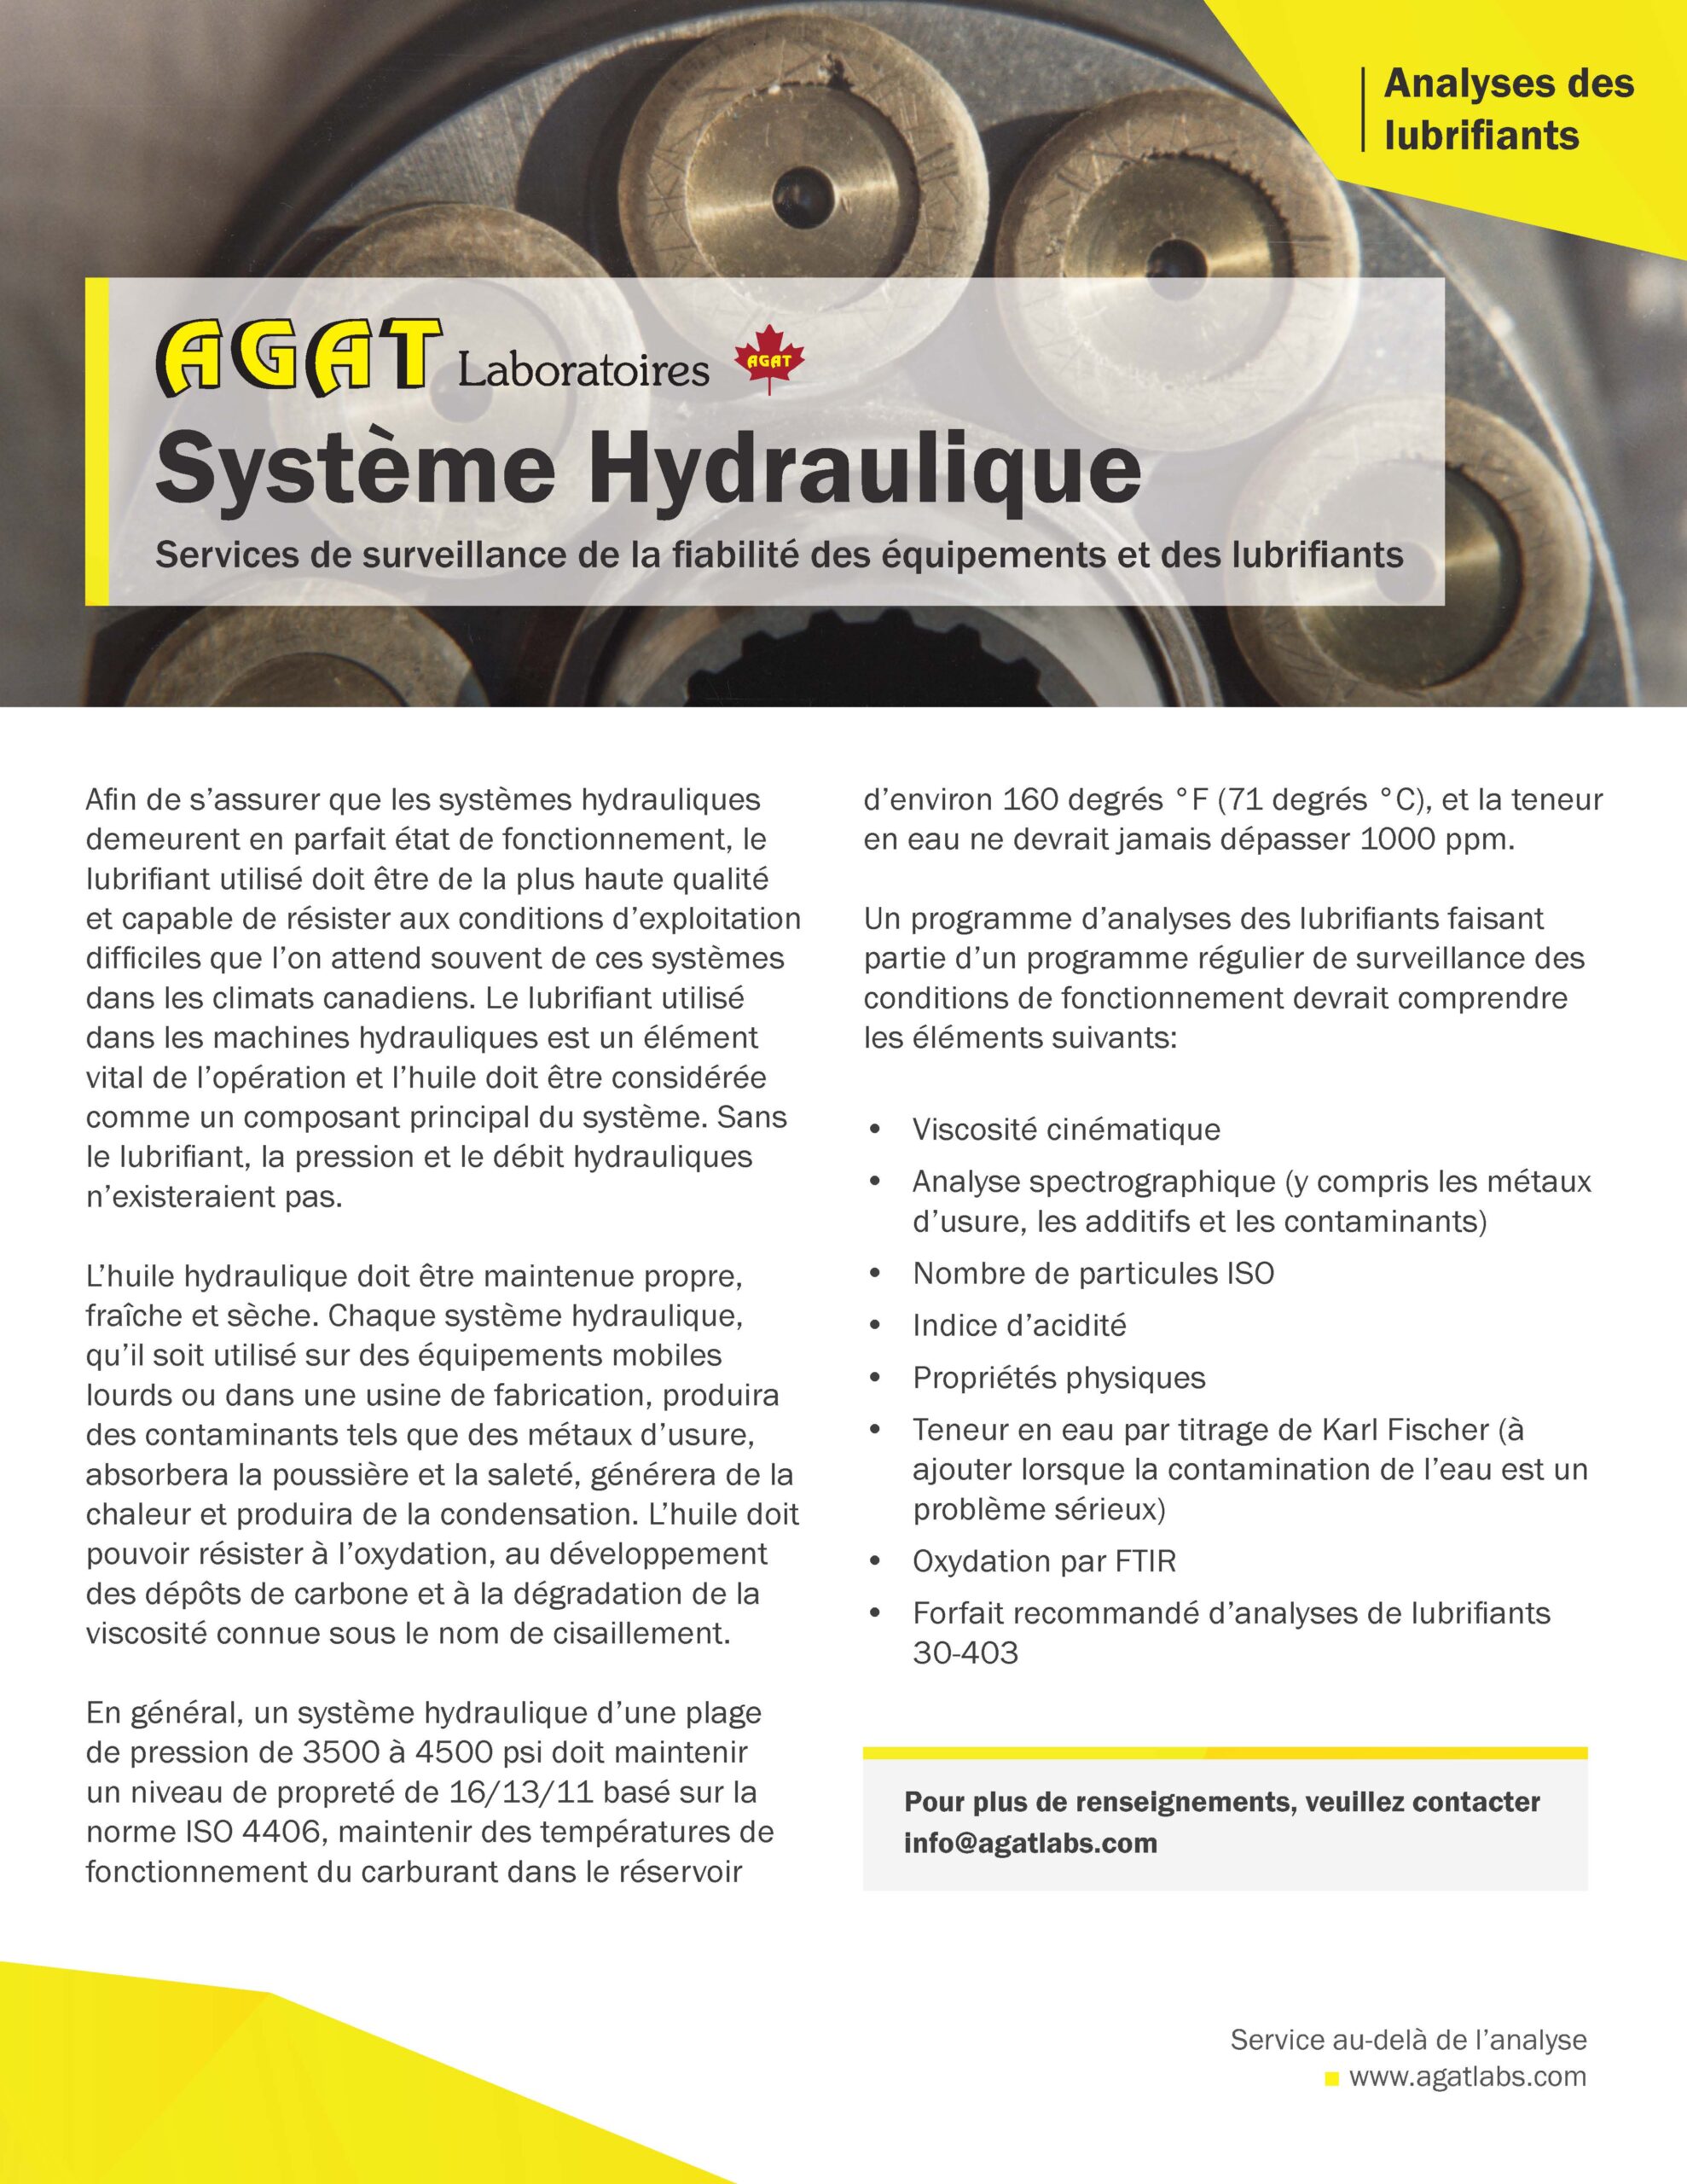 hydraulic system brochure agat laboratories a canadian company equipment reliability and lubricants testing services